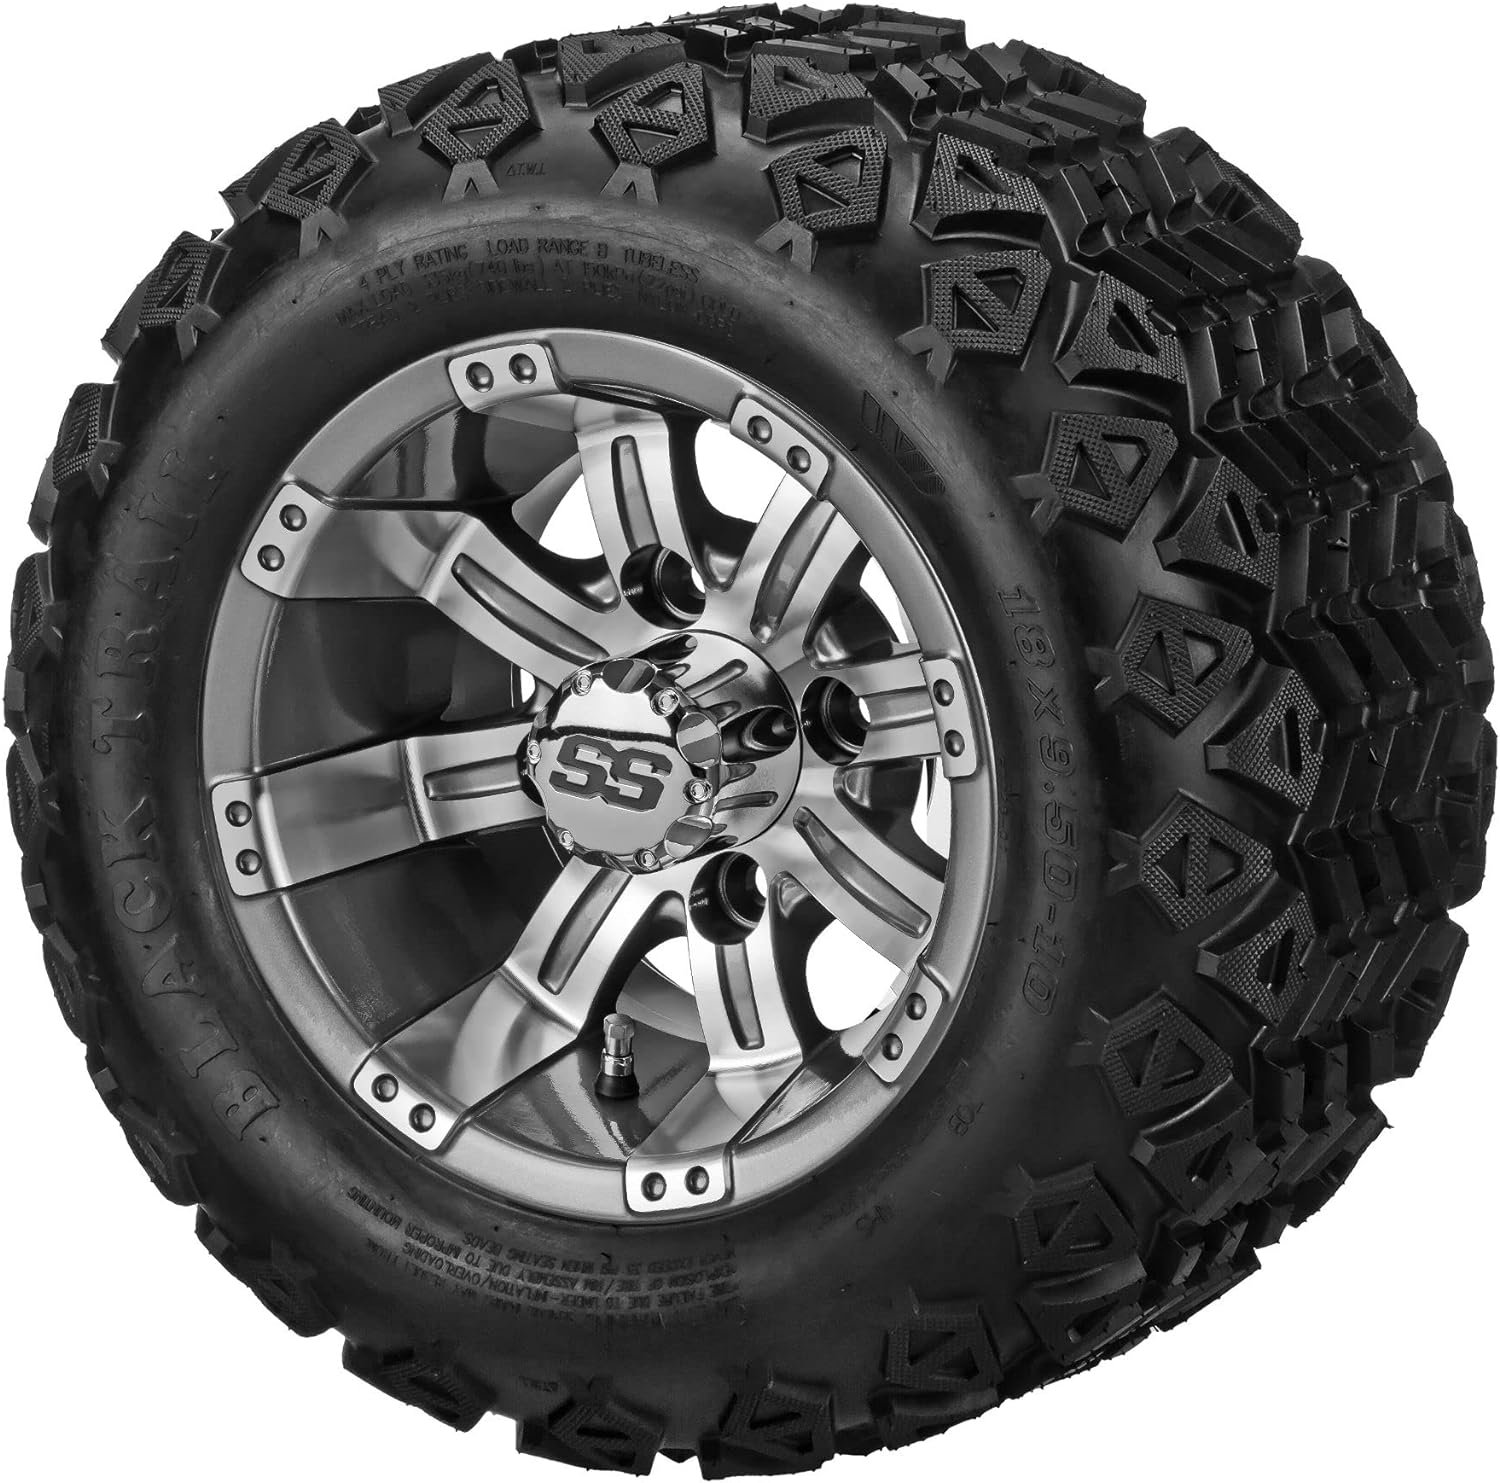 RM Cart - 10 Casino Gun Metal Gray/Machined on 18x9.5-10 Black Trail Tire (set of 4), Fits Yamaha carts, Golf Cart Tires and Wheels Combo, Can be Used on Lawn Mowers and ATVs